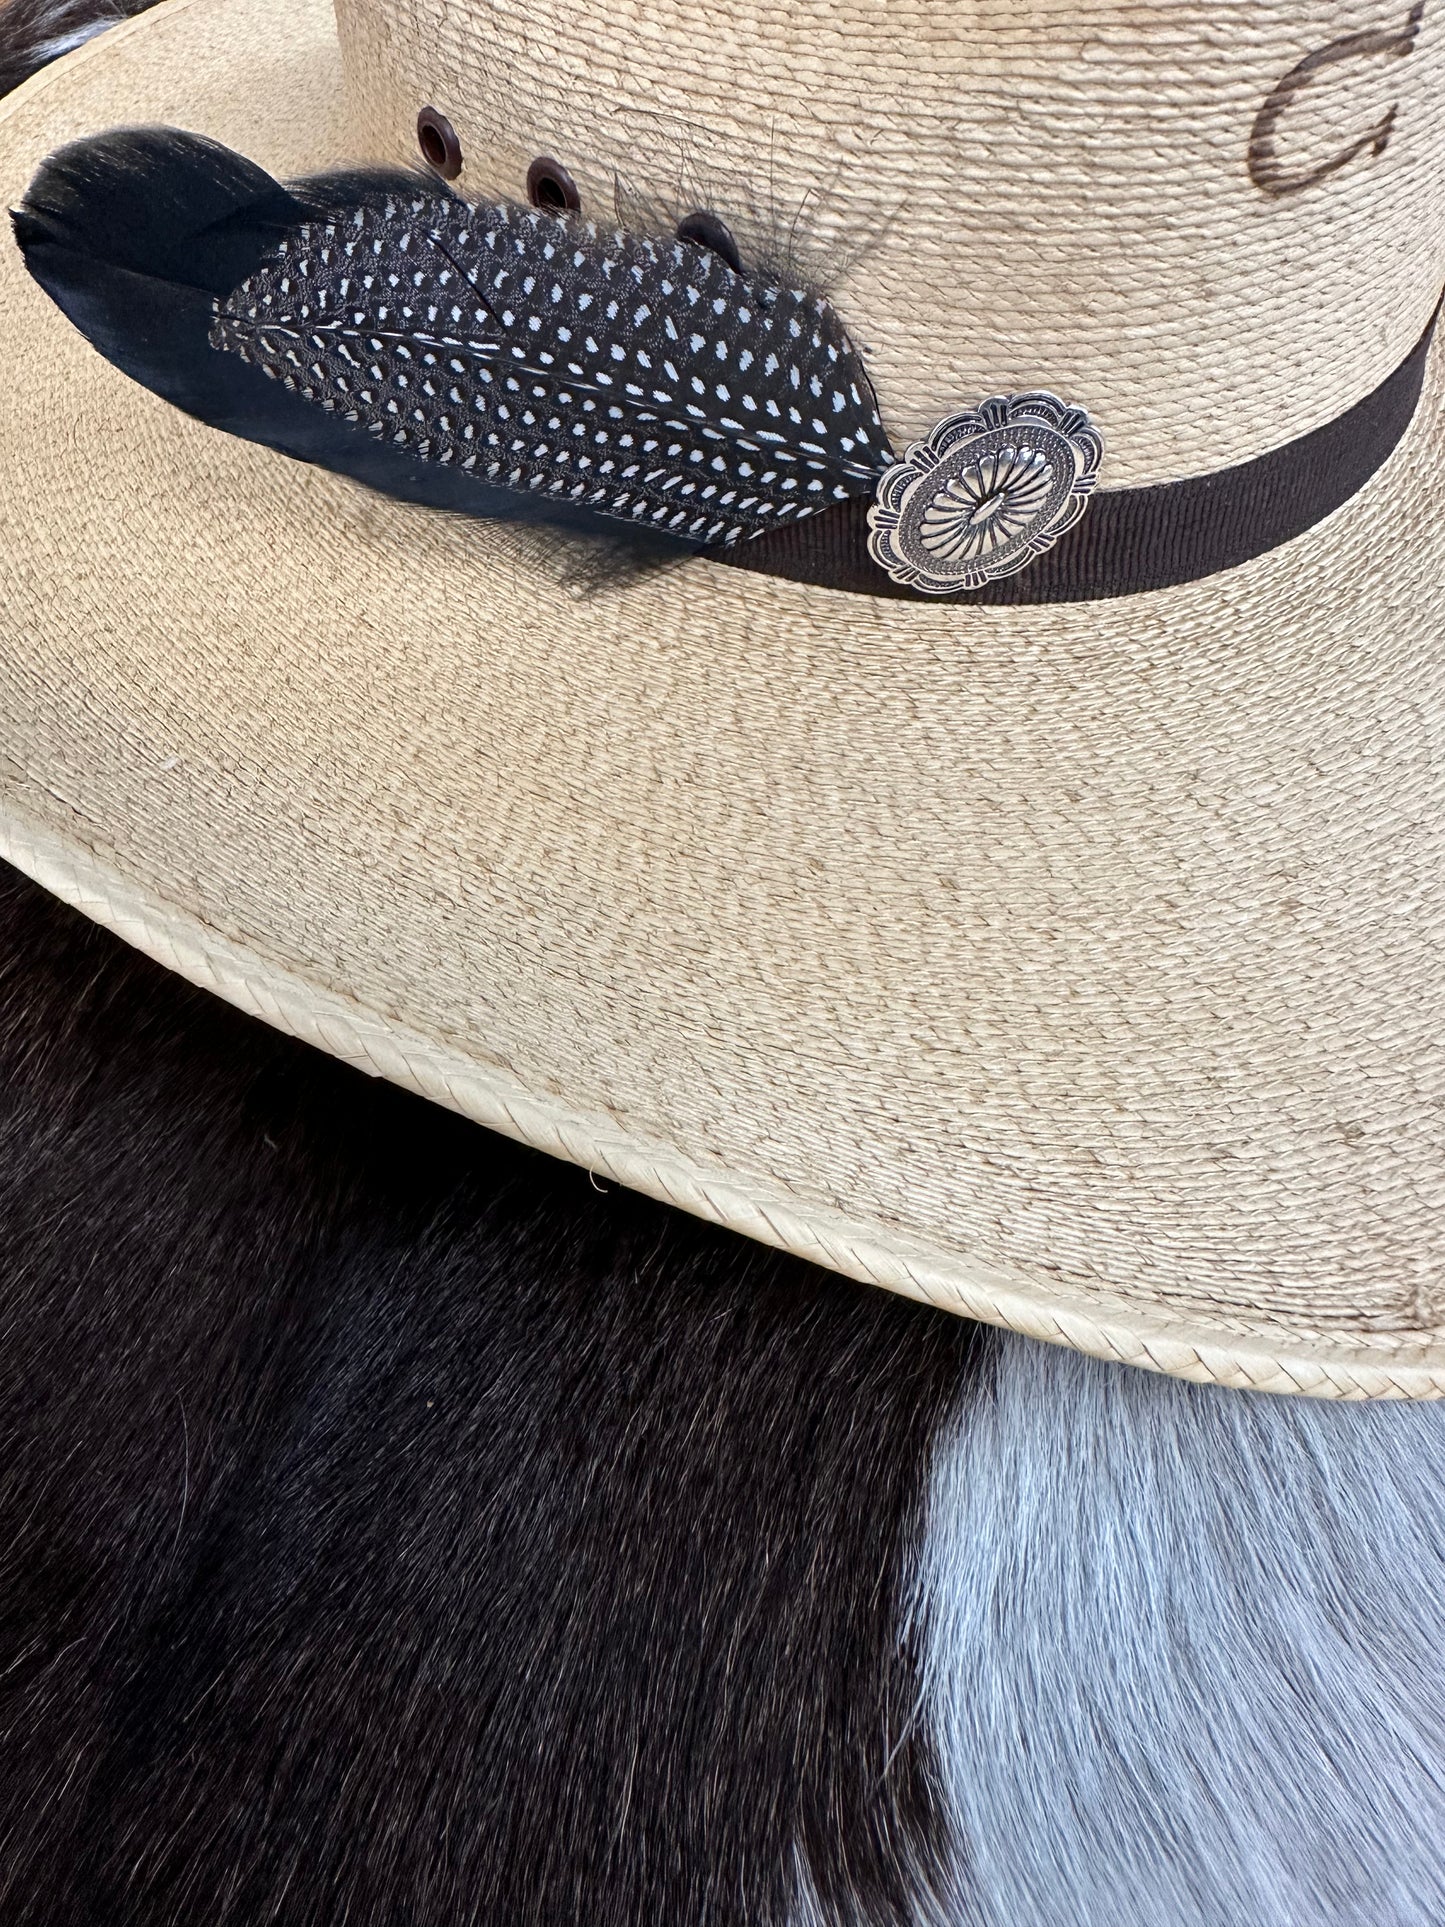 The Black and White Feather Hat Pin